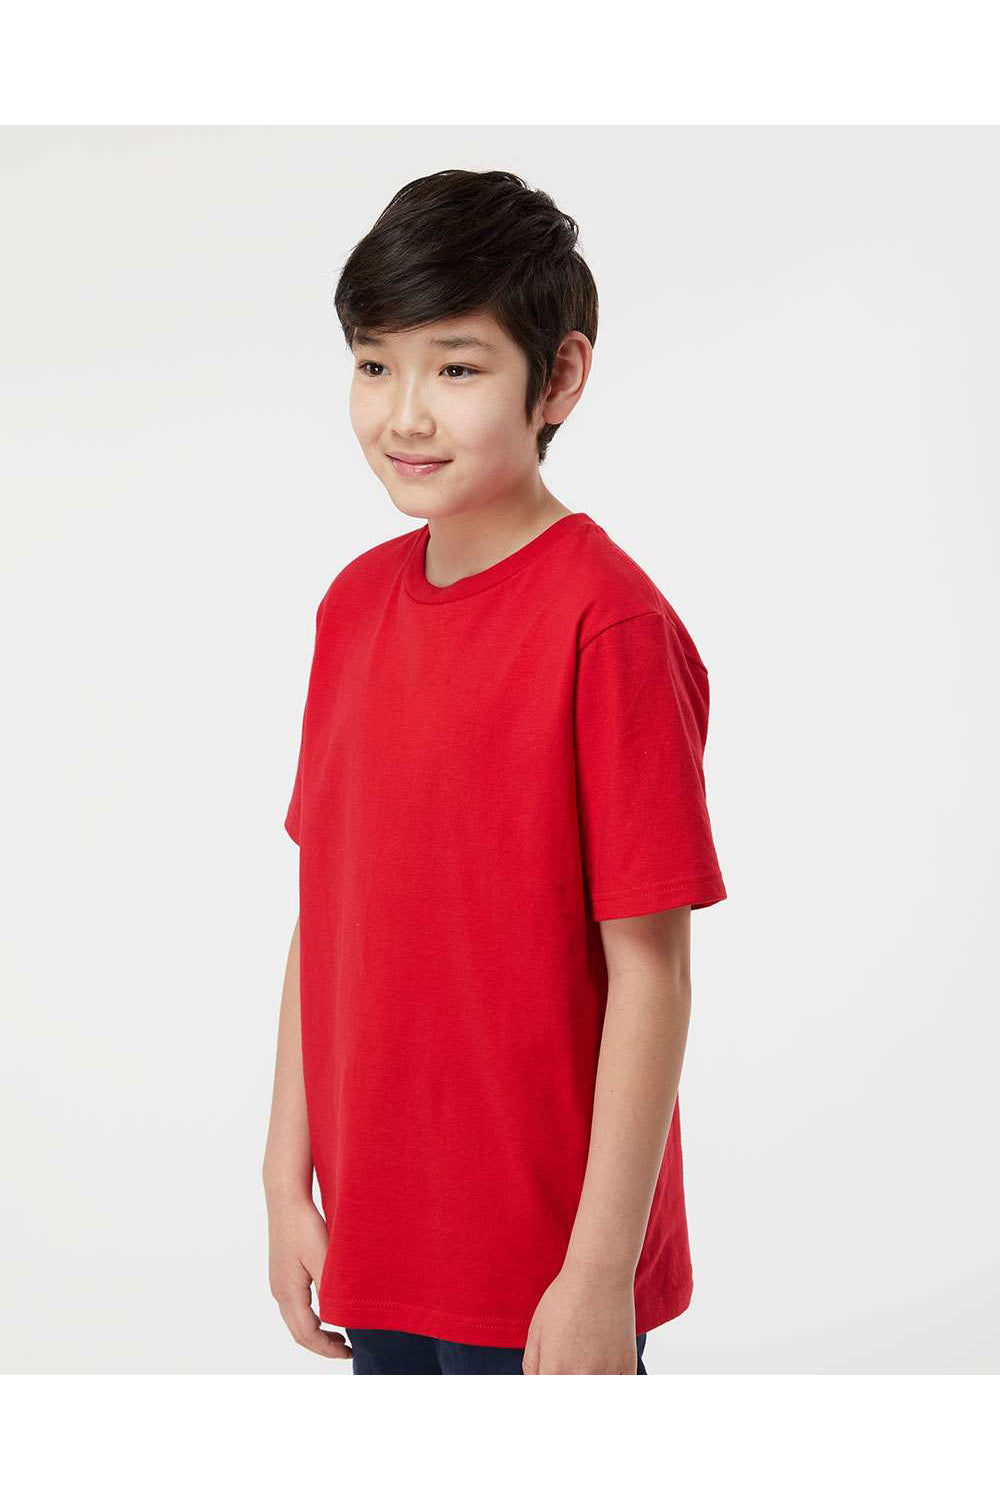 Tultex 295 Youth Jersey Short Sleeve Crewneck T-Shirt Red Model Side